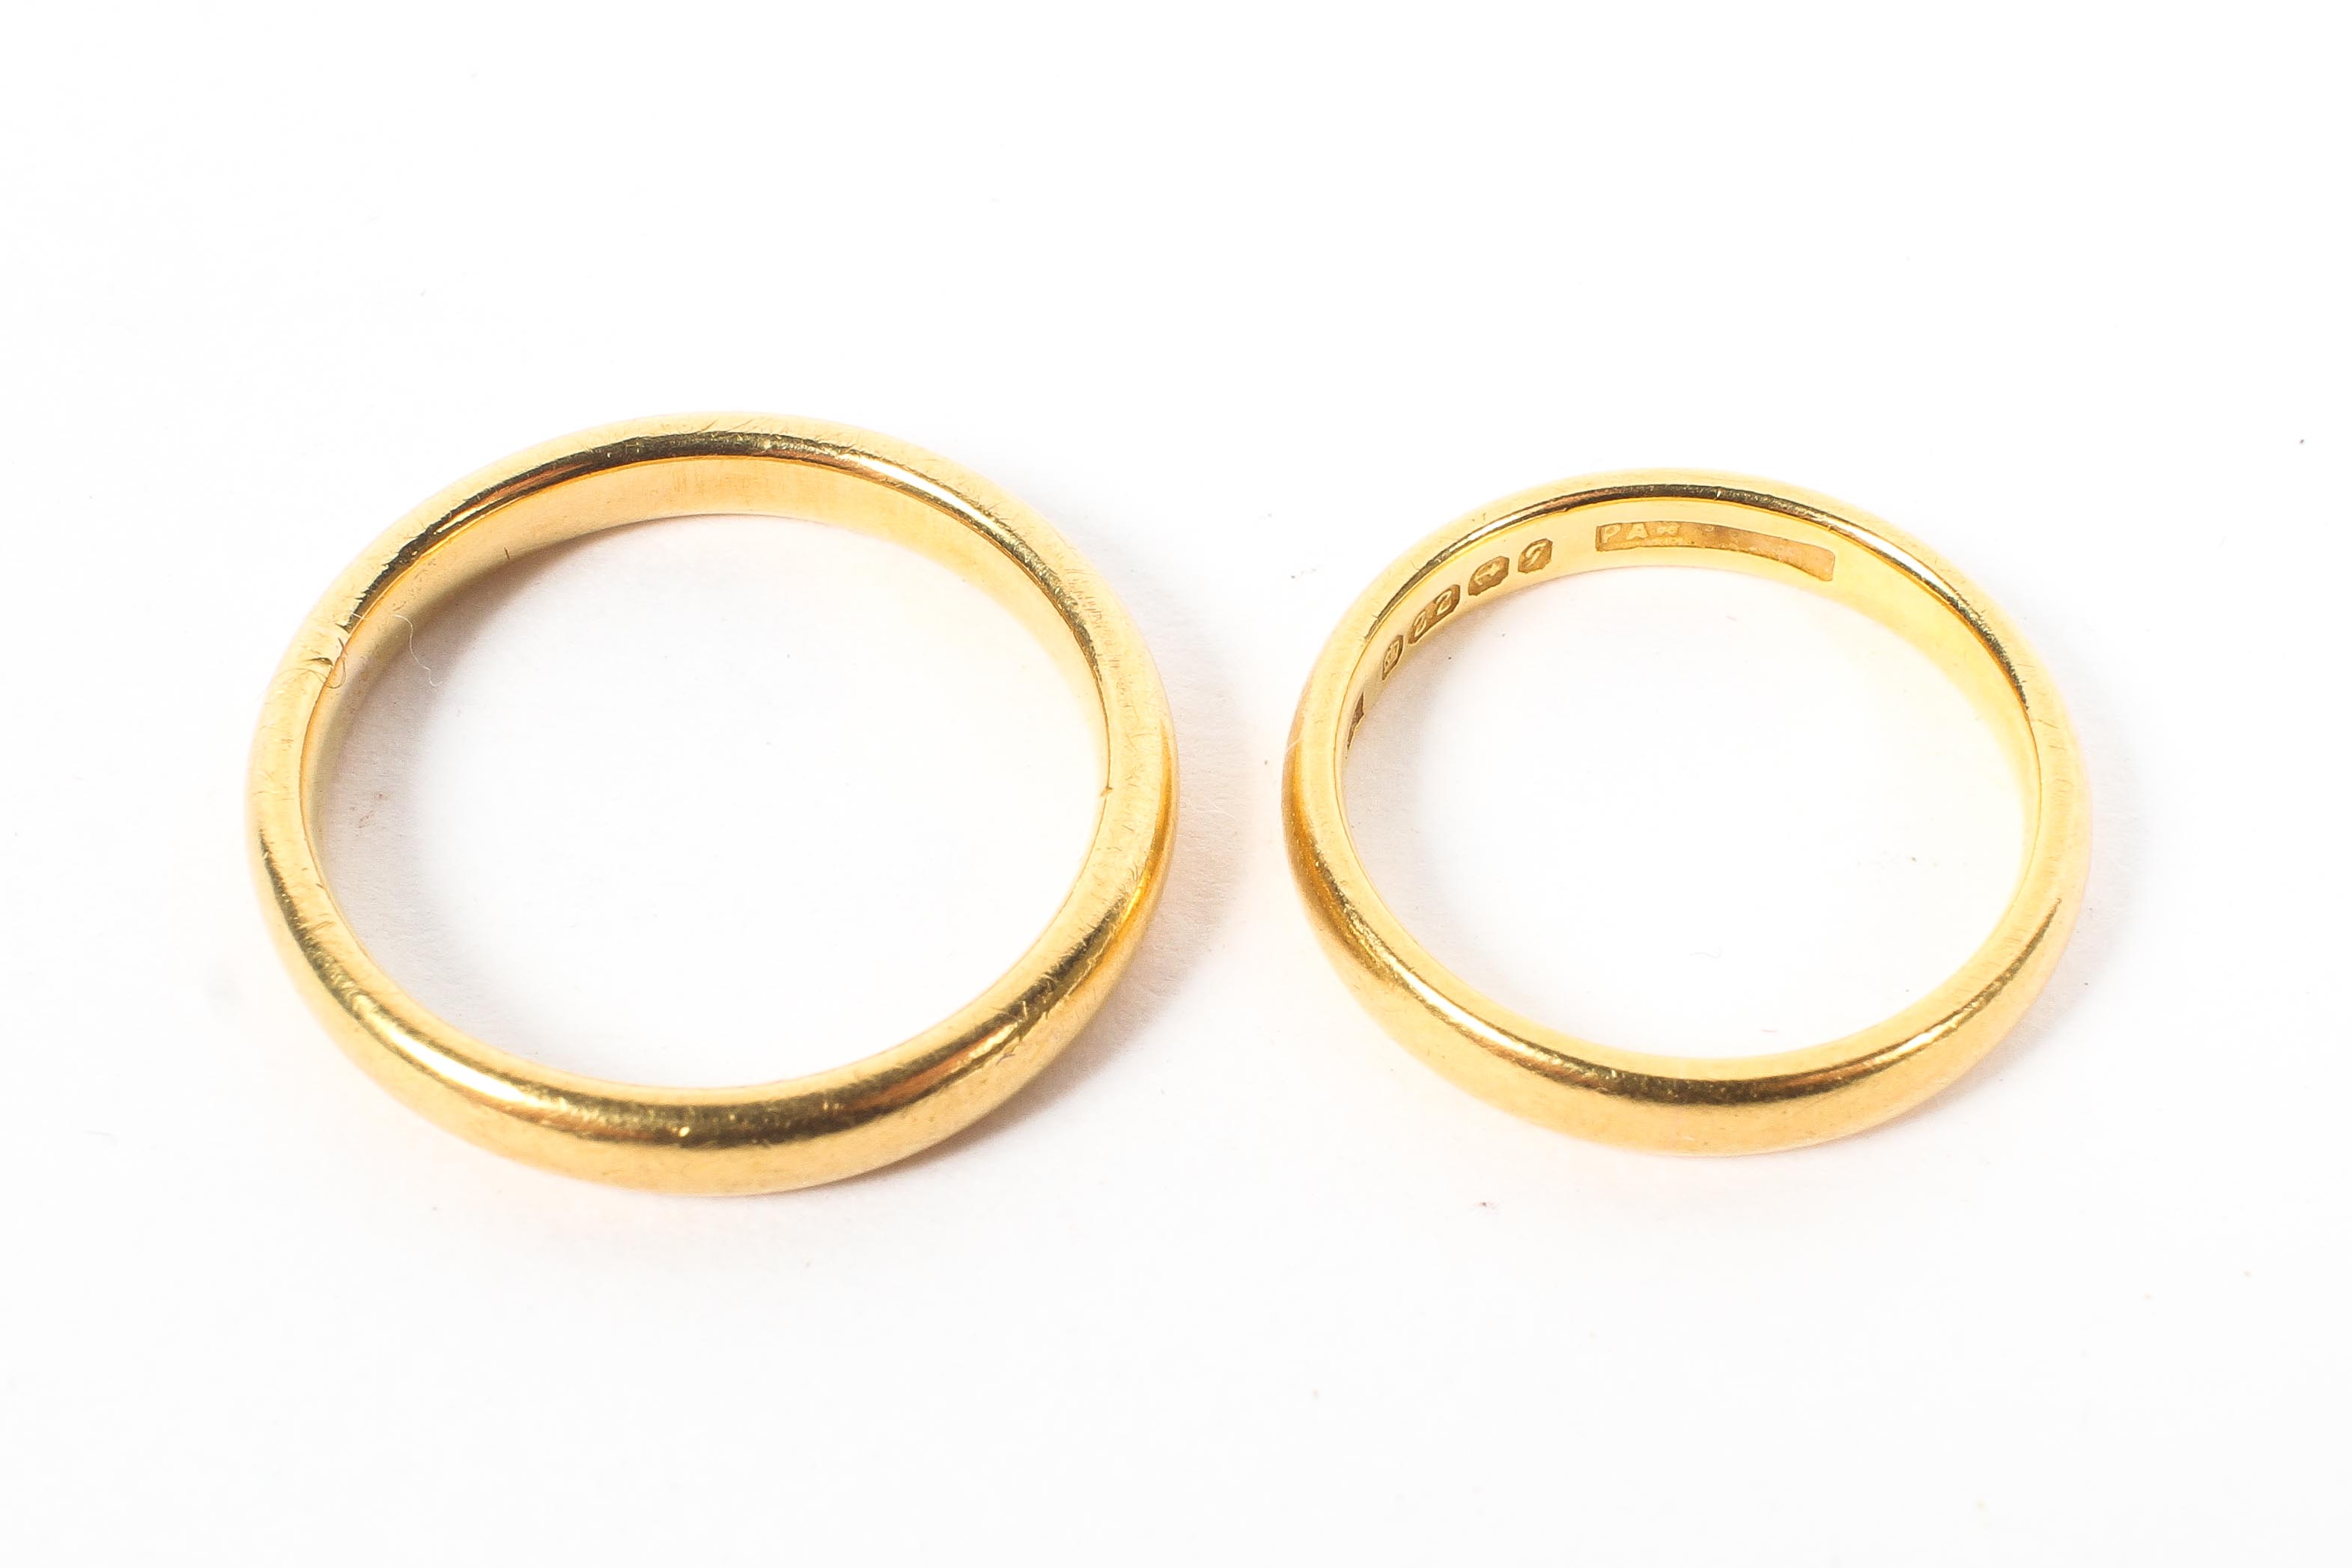 Two 22ct gold wedding bands. 7.4g.